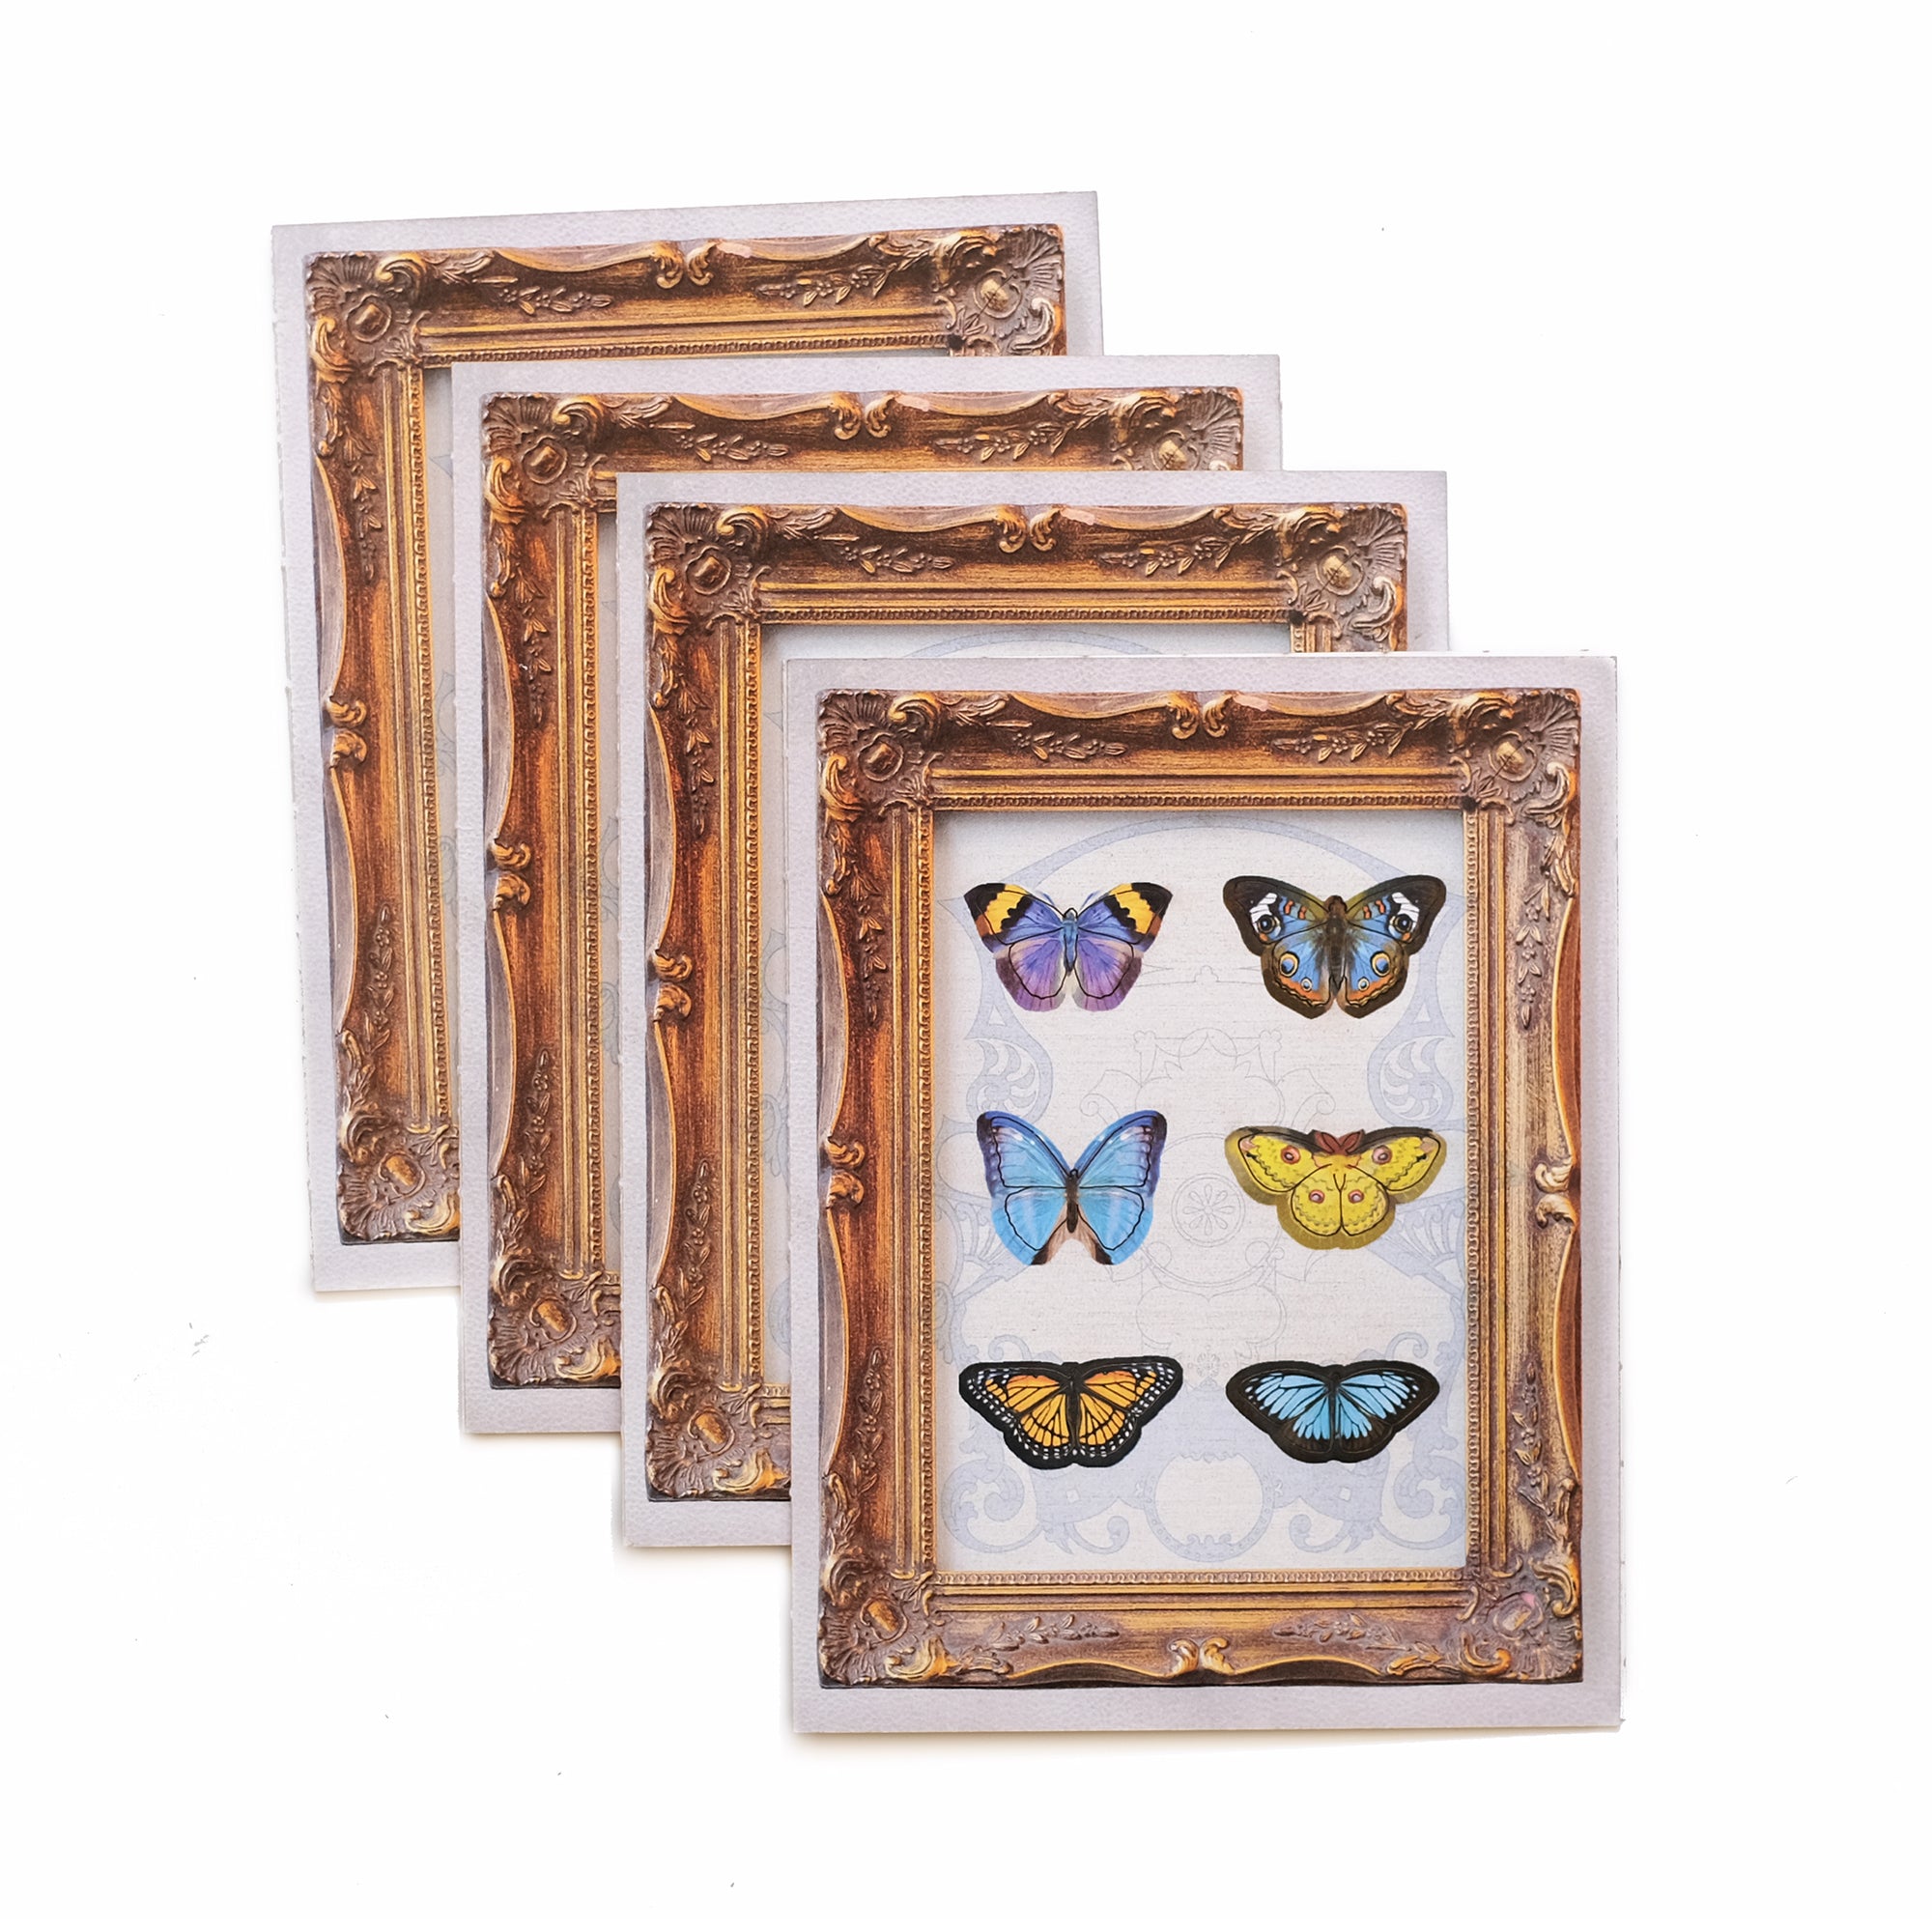 'Sunny' Mini Butterfly 'Pop-Out' Greeting Card - Set of 4 - Reseller Wholesale